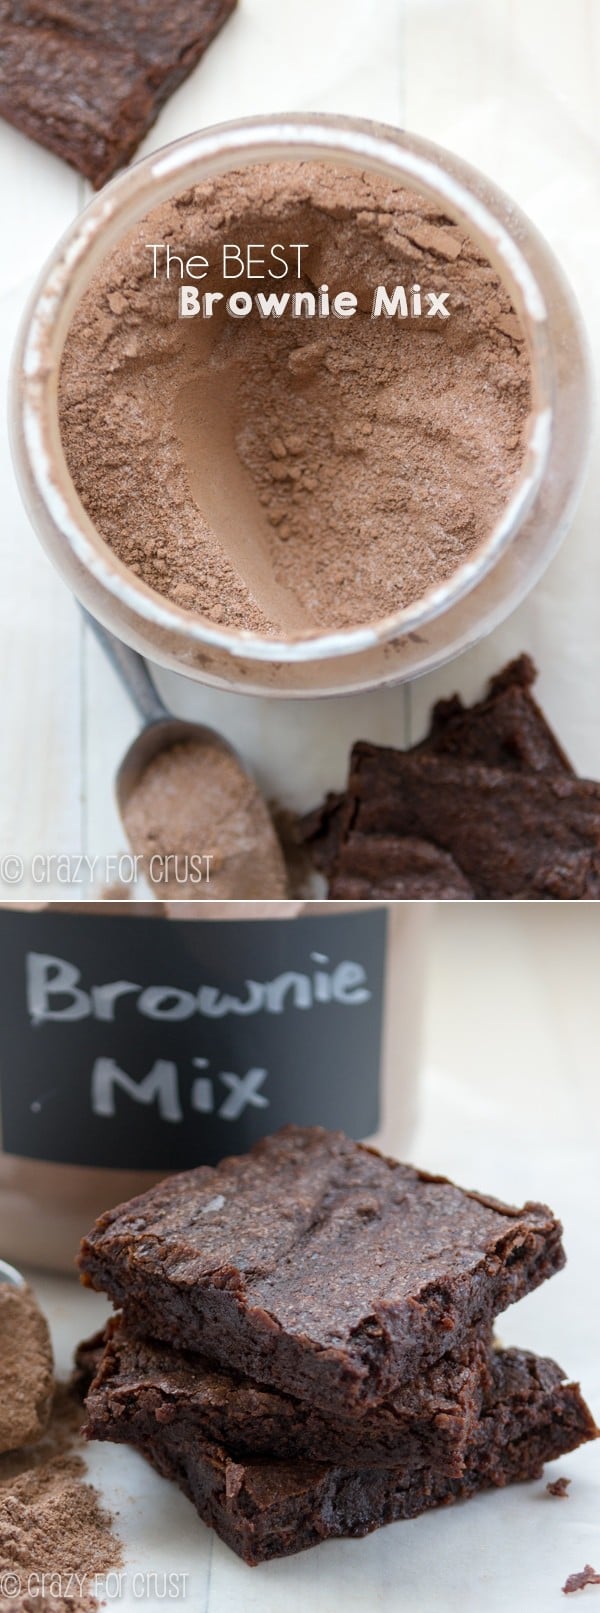 The Best Homemade Brownie Mix - it makes the best brownies!